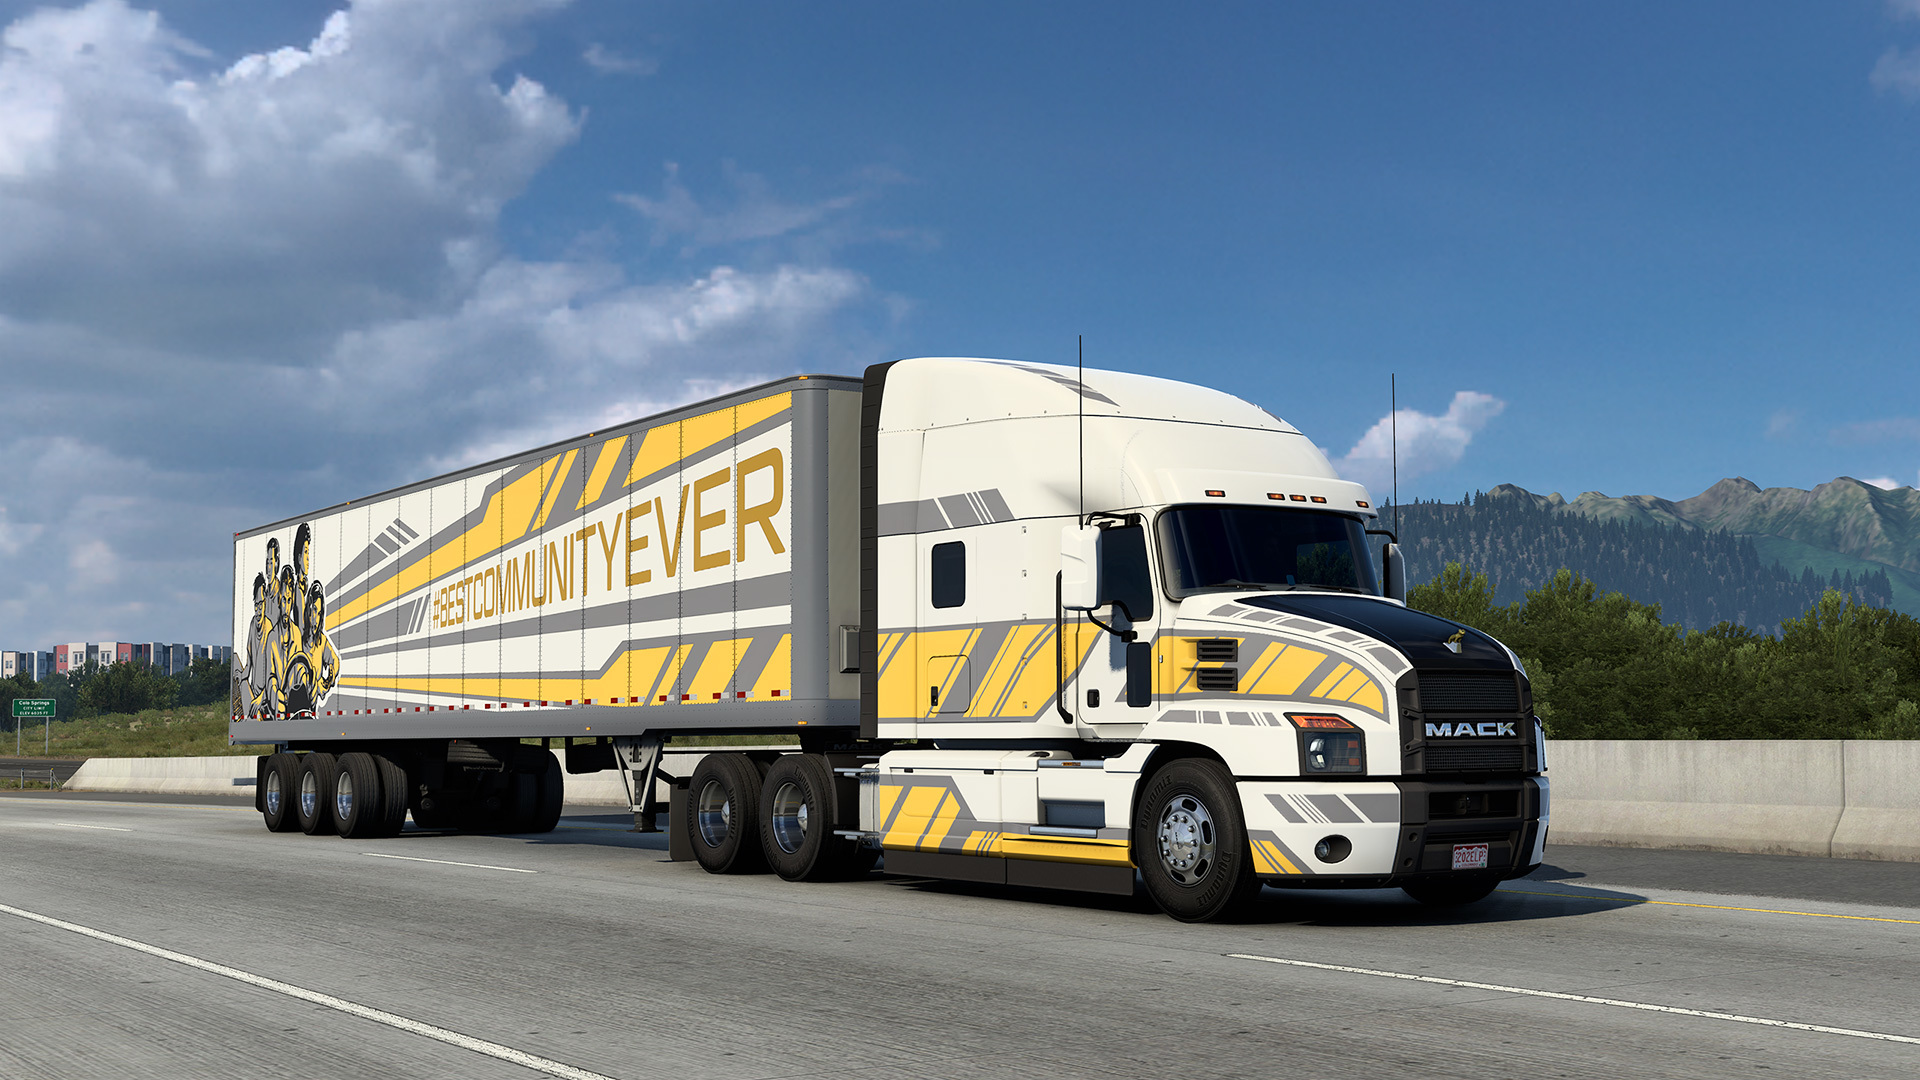 Euro Truck Simulator 2's photo mode update will soon let you capture trucks  in their best light